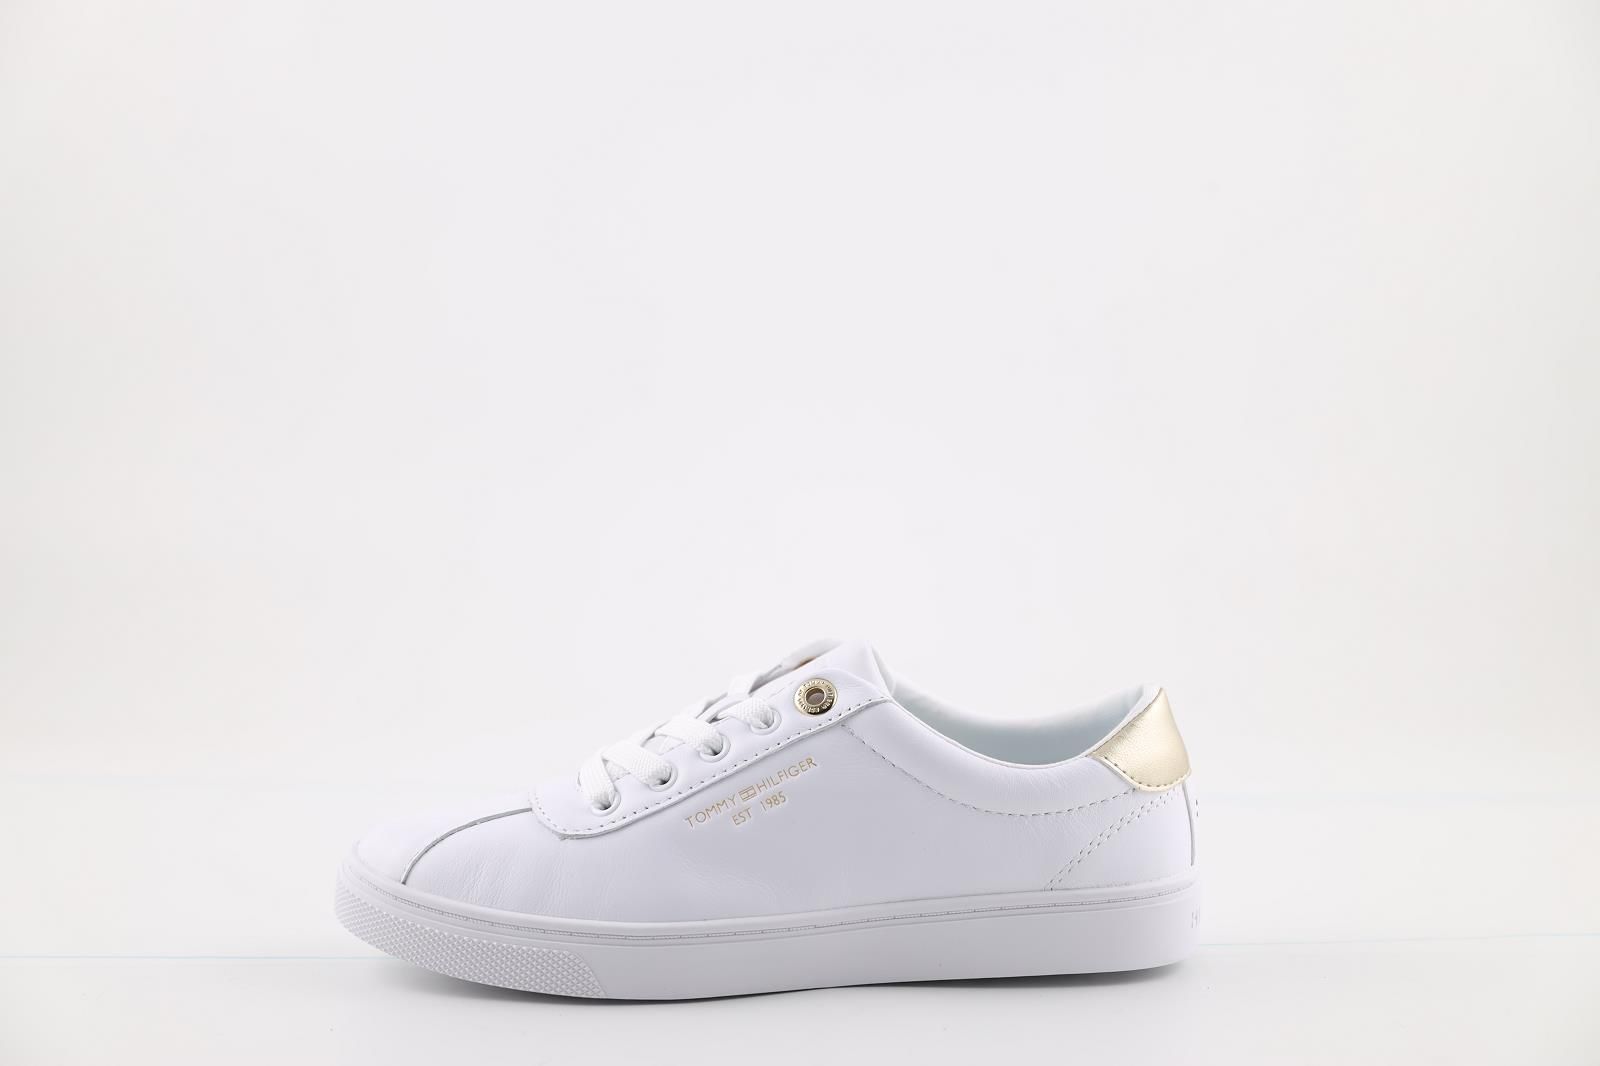 Tommy Hilfiger Sneackers Blanc/Or dames (Roche - FW05795-YBR) - Marques à Suivre